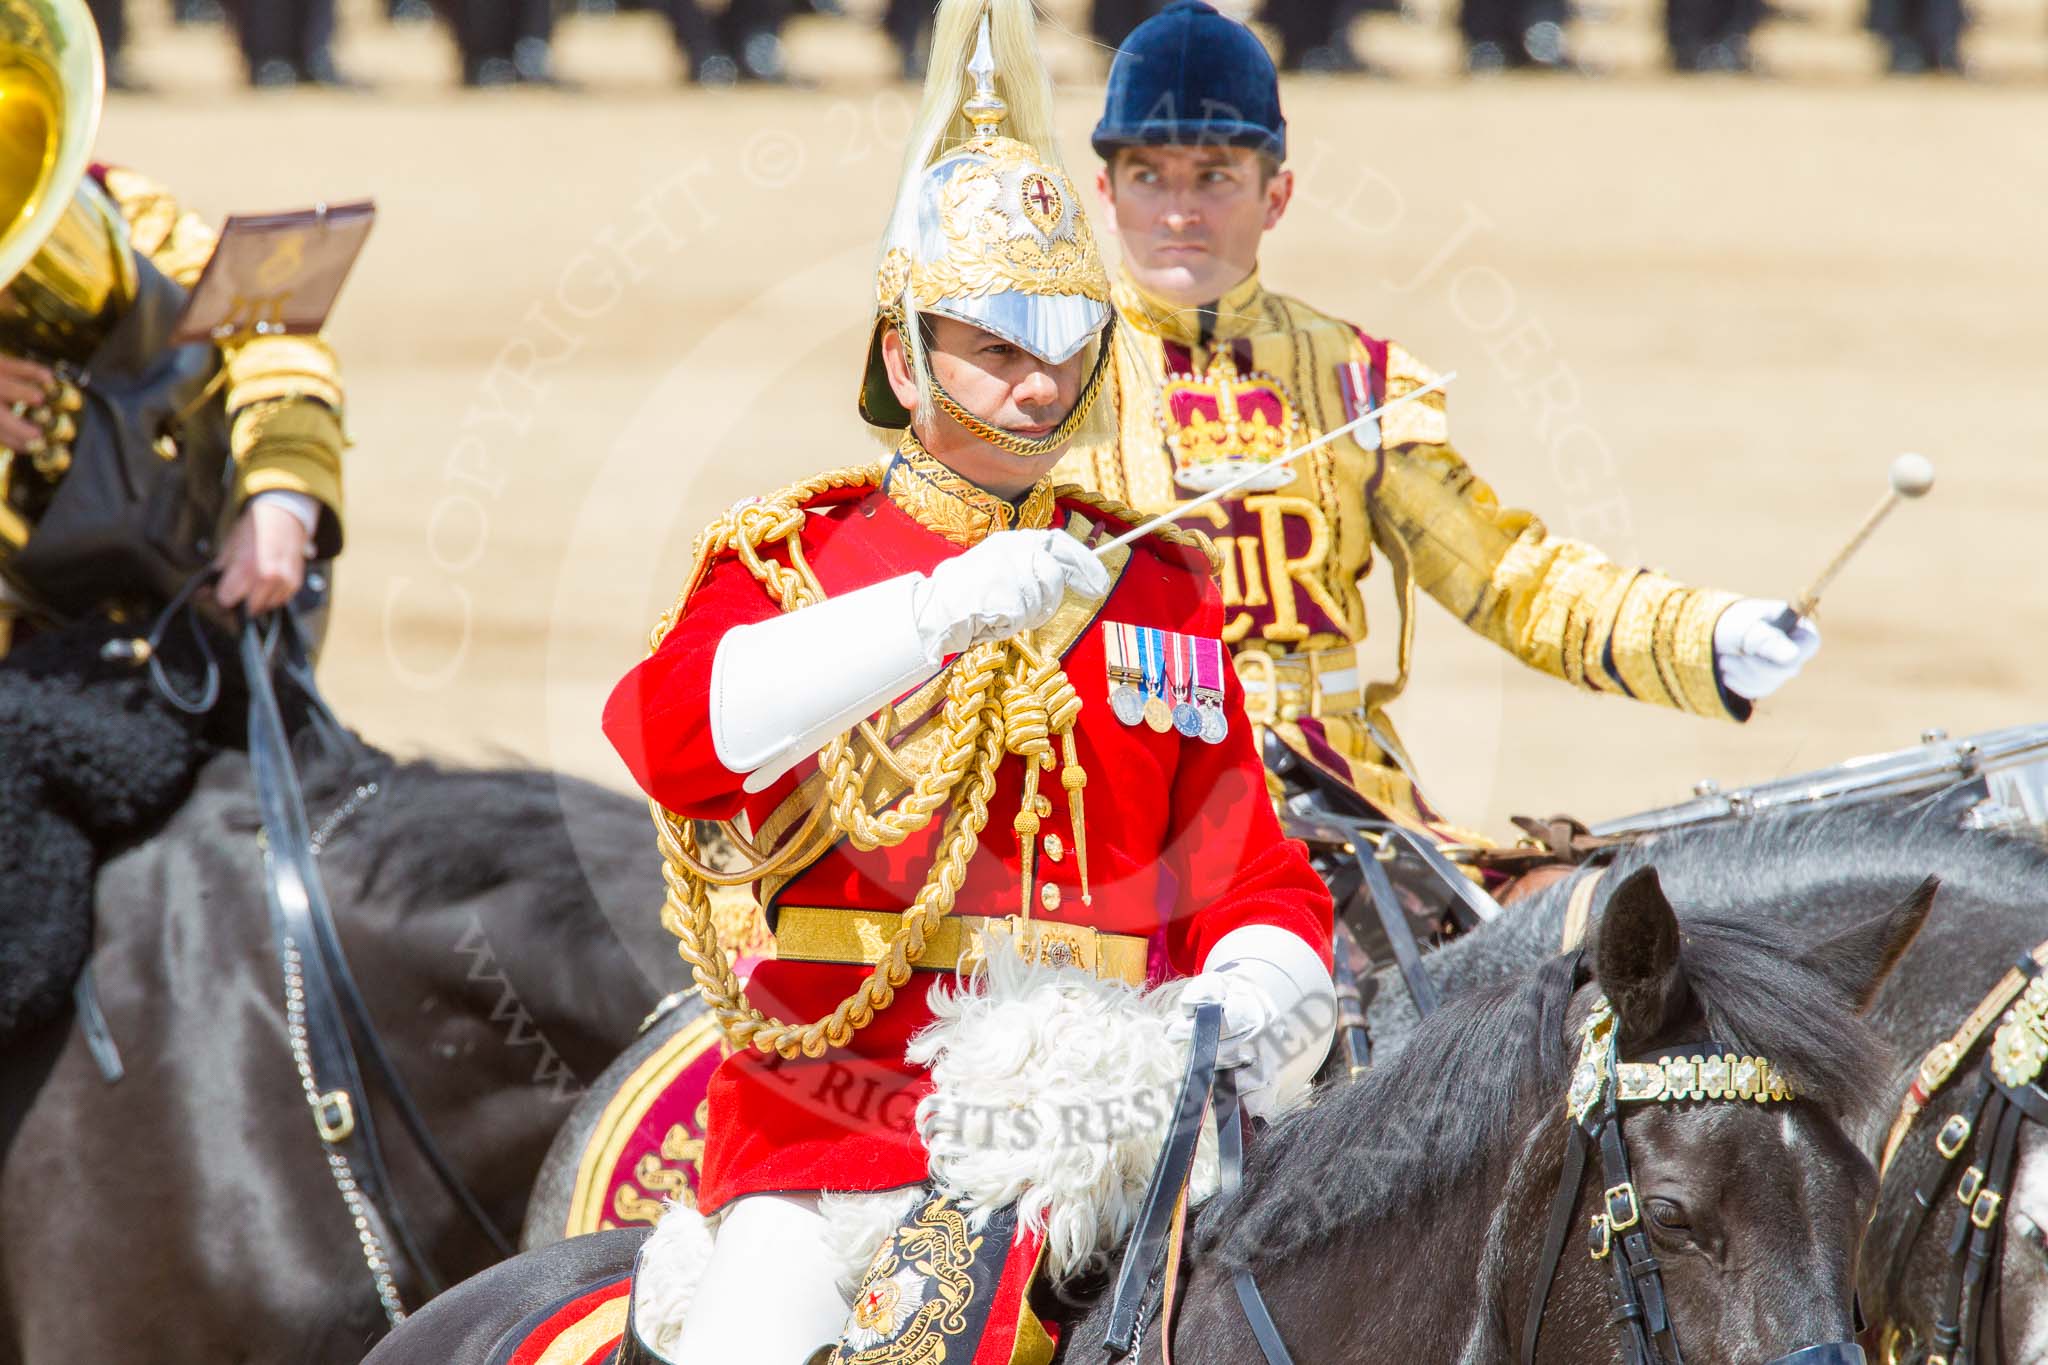 Trooping the Colour 2013: The Director of Music of the Household Cavalry, Major Paul Wilman, The Life Guards, during the Mounted Troops Ride Past. Behind him the kettle drummer from The Blues and Royals. Image #660, 15 June 2013 11:53 Horse Guards Parade, London, UK